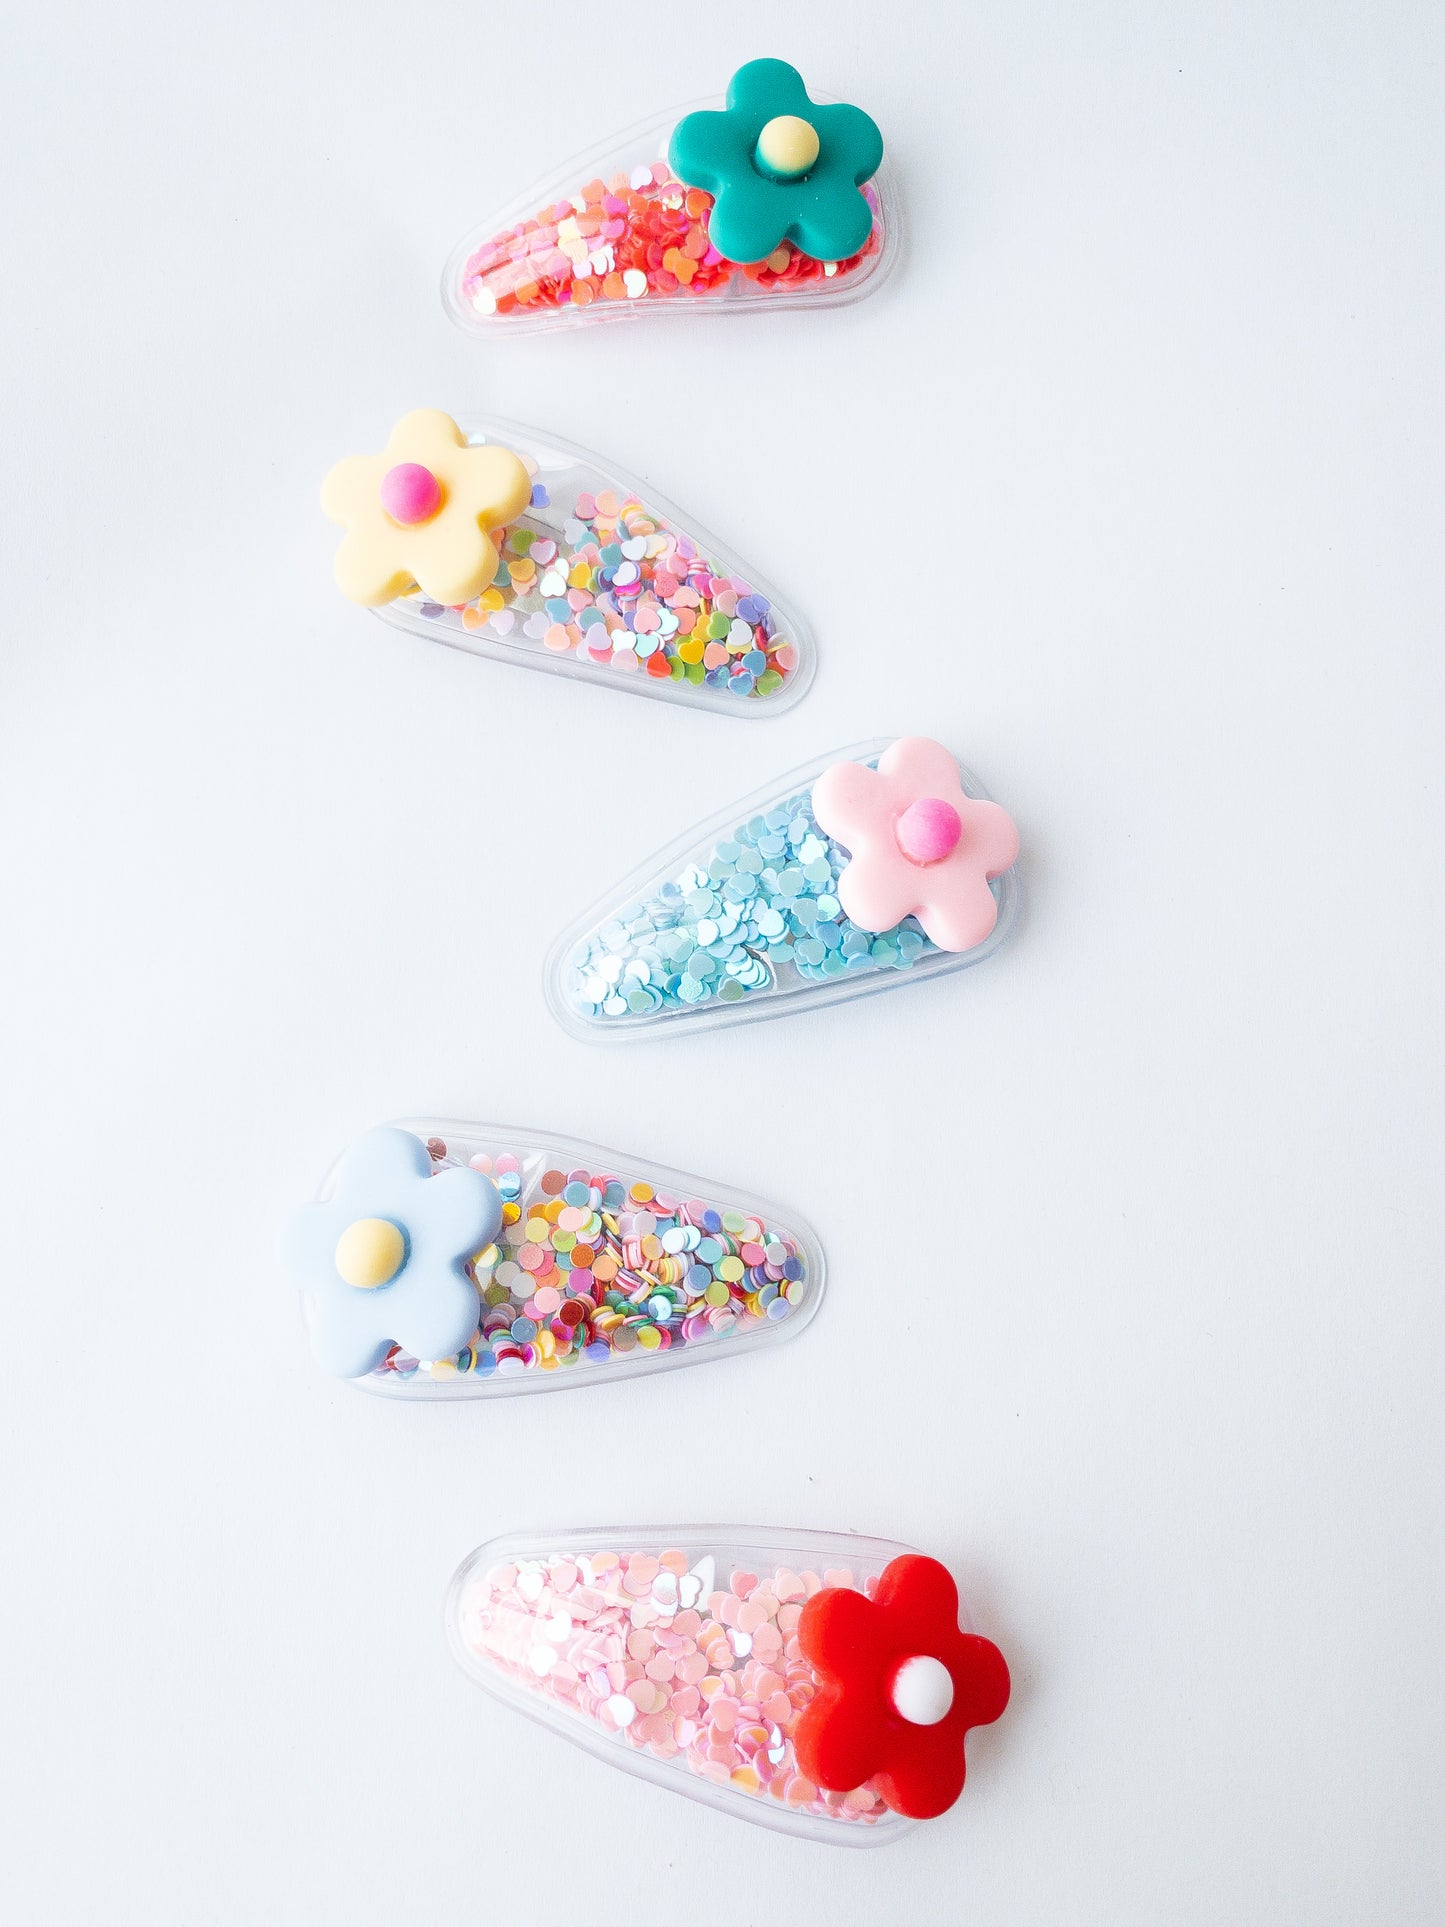 Our signature shaker hair clips but with flowers! Each snap clip is a triangular pouch filled with the most fun confetti--hearts and circles. And to top it all off, there is a pretty flower on the end of each clip. These are sure to make anyone smile!